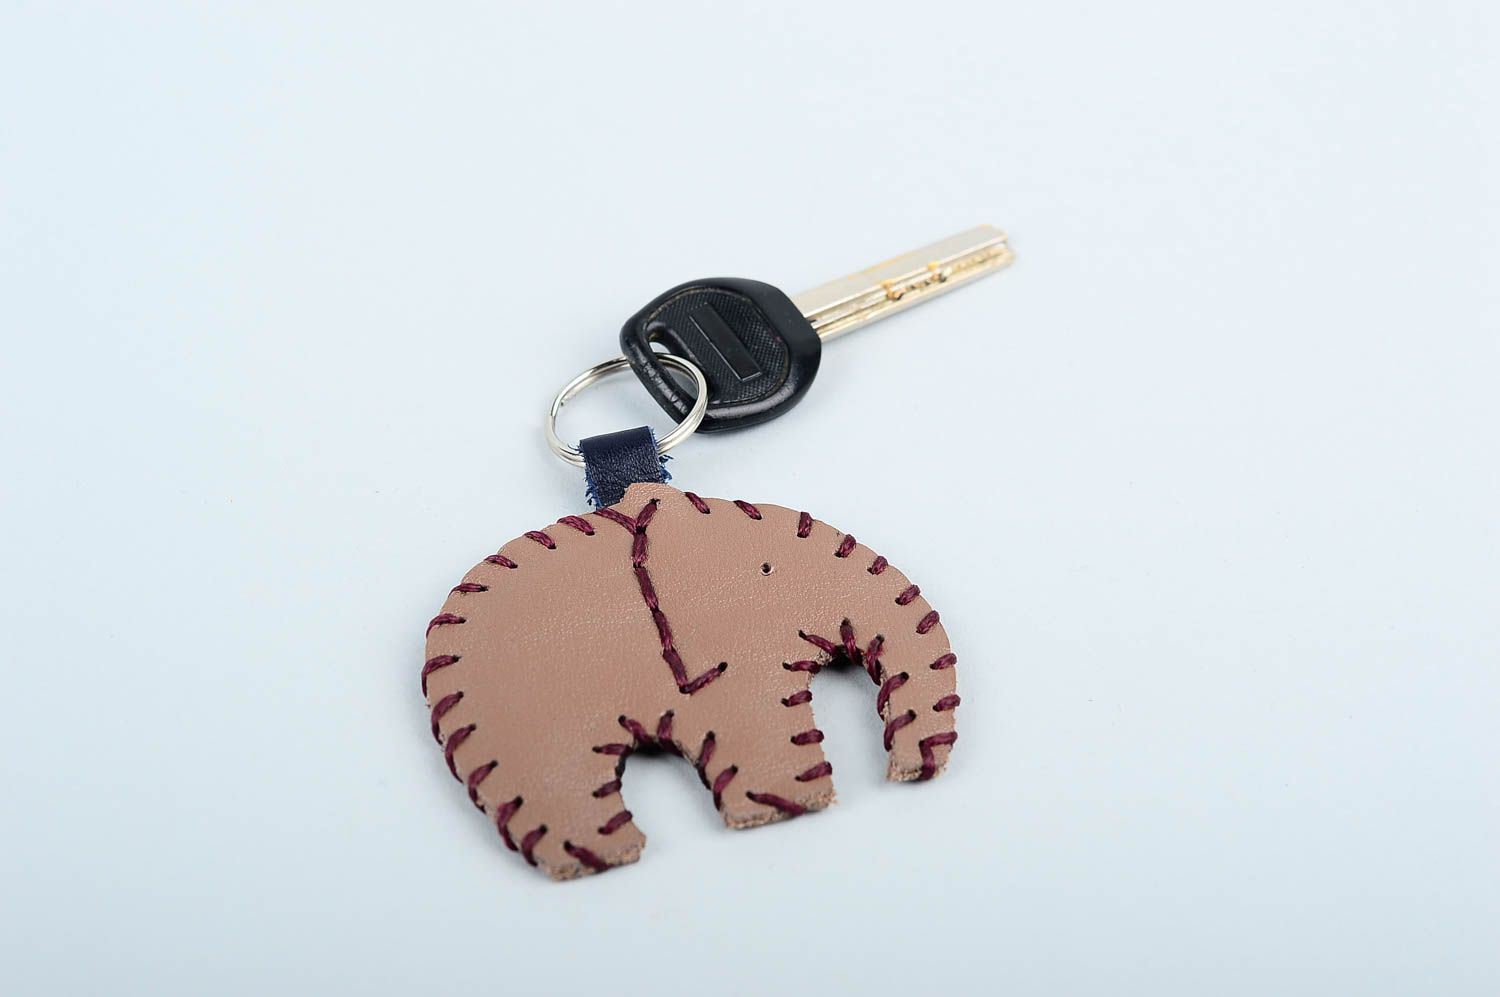 Unusual handmade leather keychain leather goods fashion accessories gift ideas photo 1